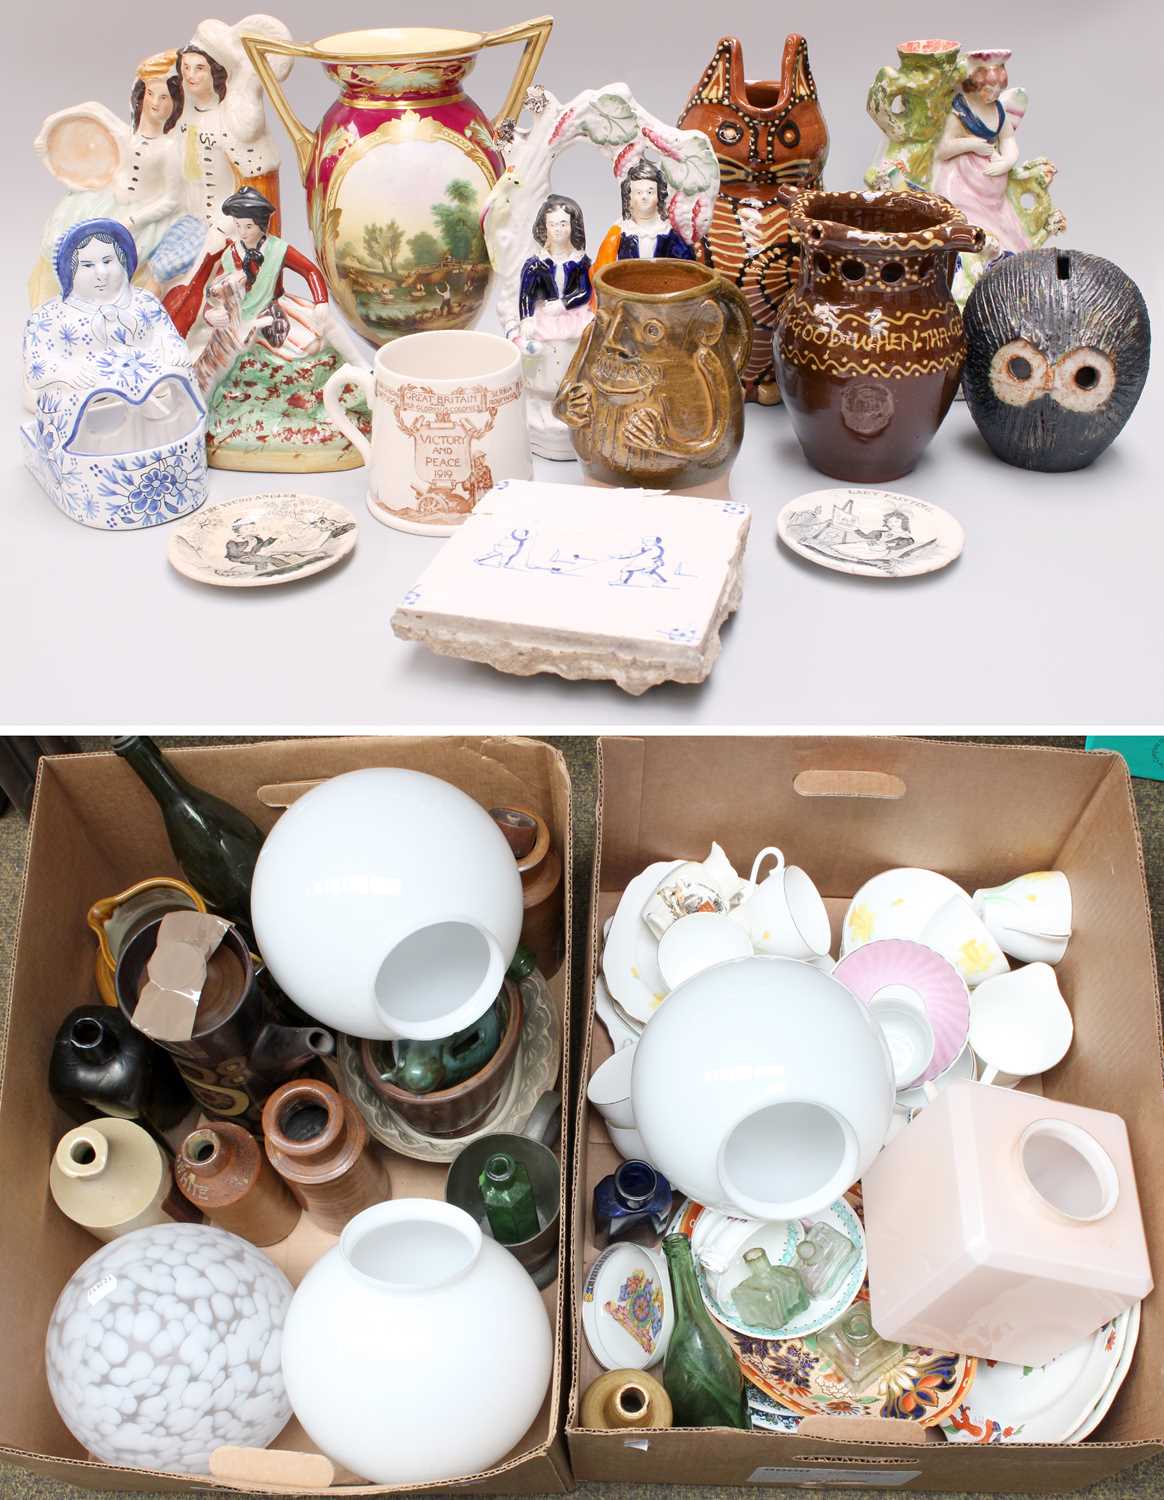 Assorted Ceramics, including an early Victorian porcelain vase with titled landscape "Sheep